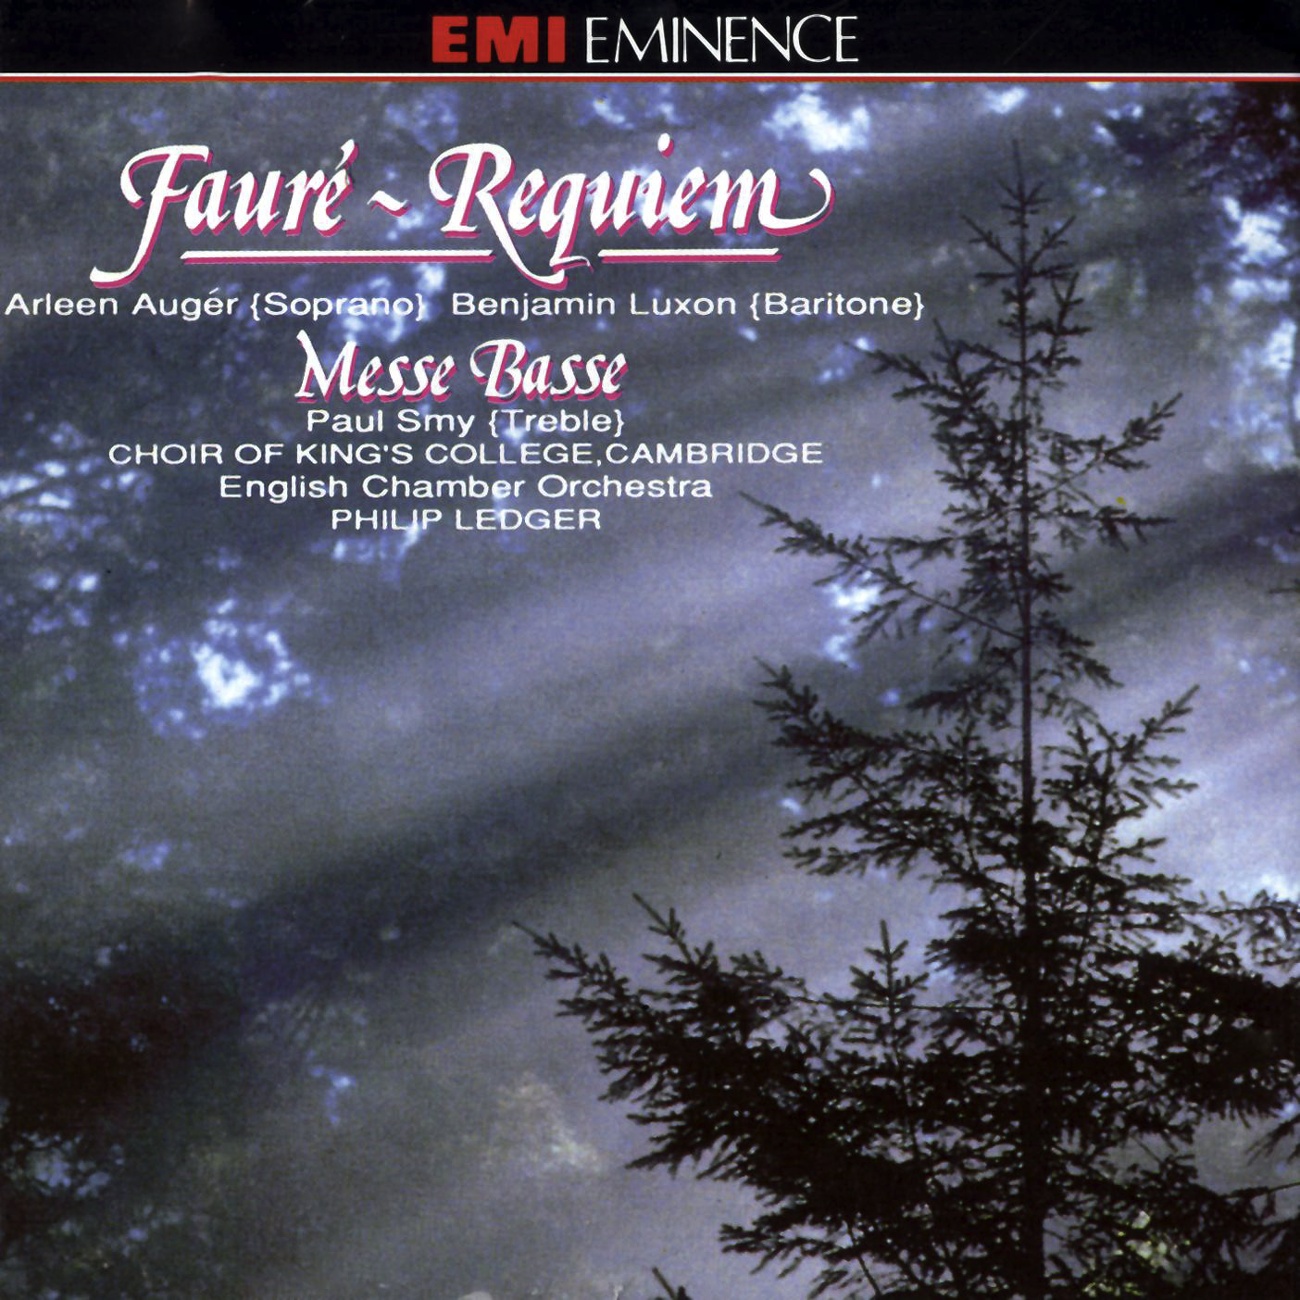 Faure: Requiem, Op. 48: Introit And Kyrie